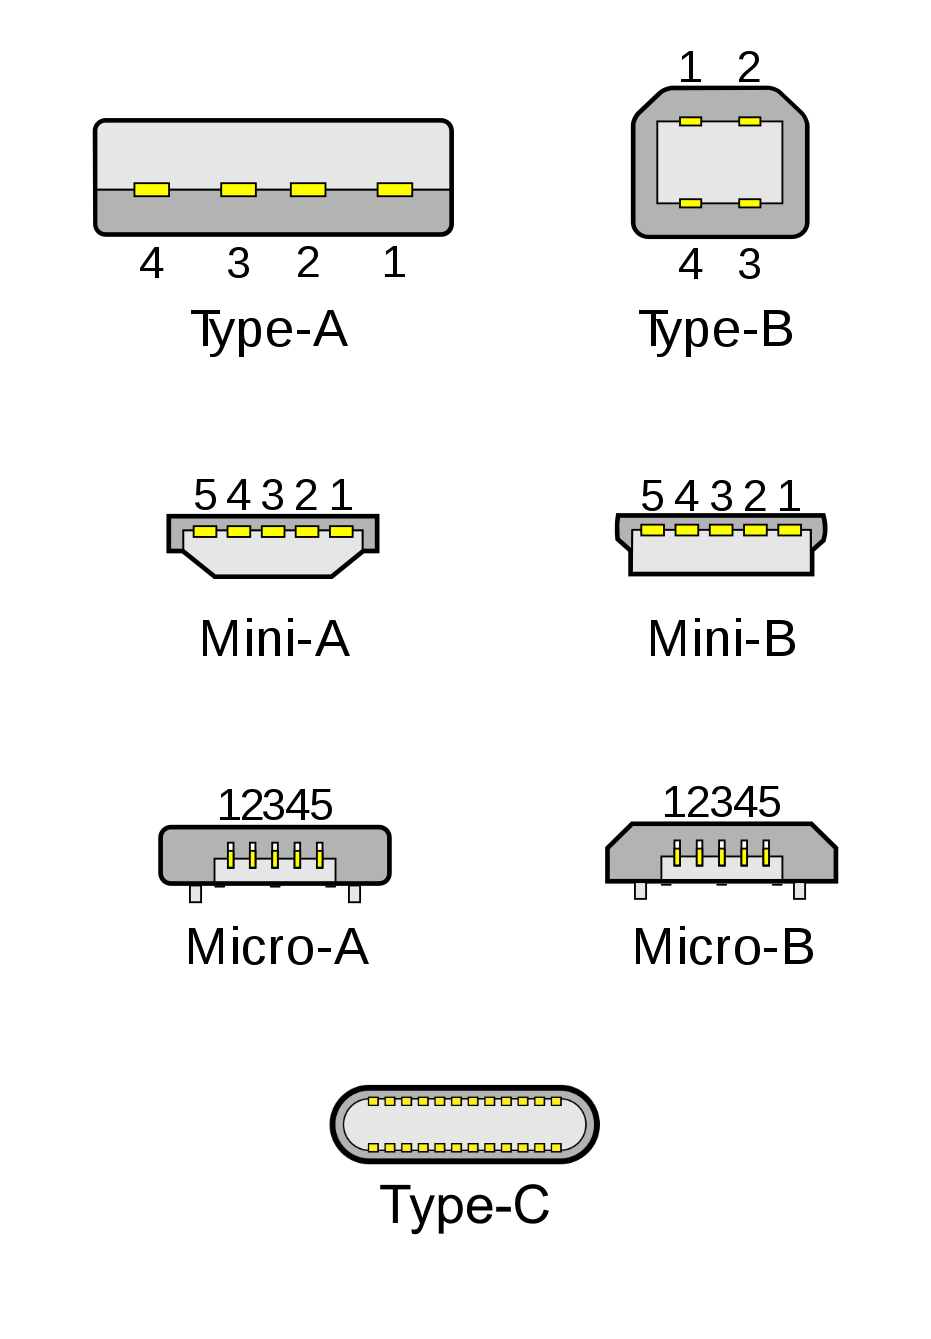 Some variants of connectors supporting up to USB 2.0, as the USB Type-C connector. The form factor of the Type-A connector is the same between generations, but the USB 3.0 supporting cables and connectors contain more pins.